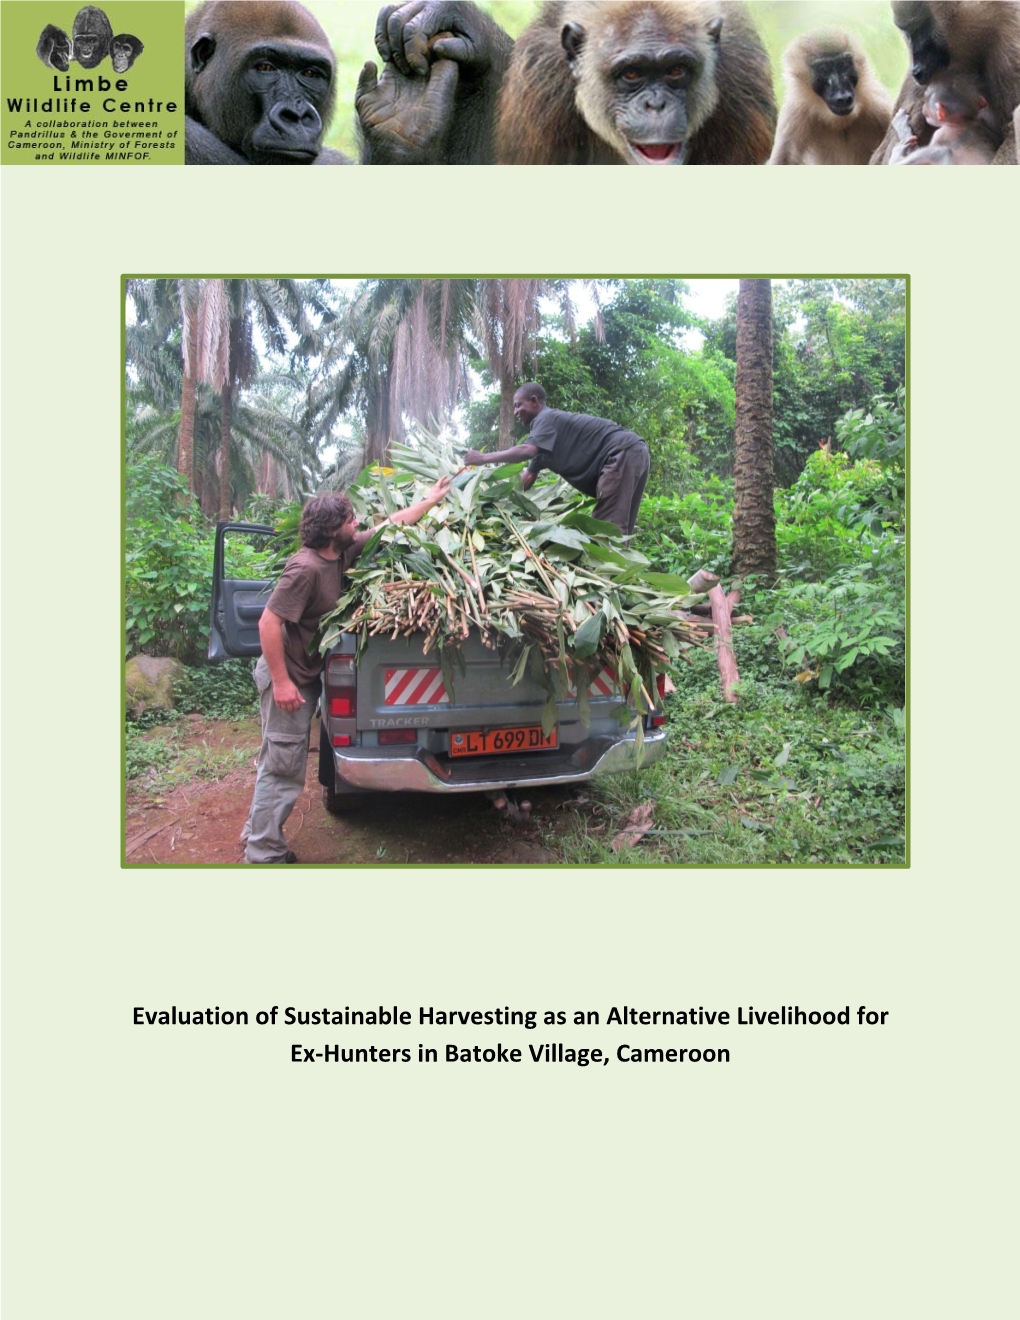 Evaluation of Sustainable Harvesting As an Alternative Livelihood for Ex-Hunters in Batoke Village, Cameroon